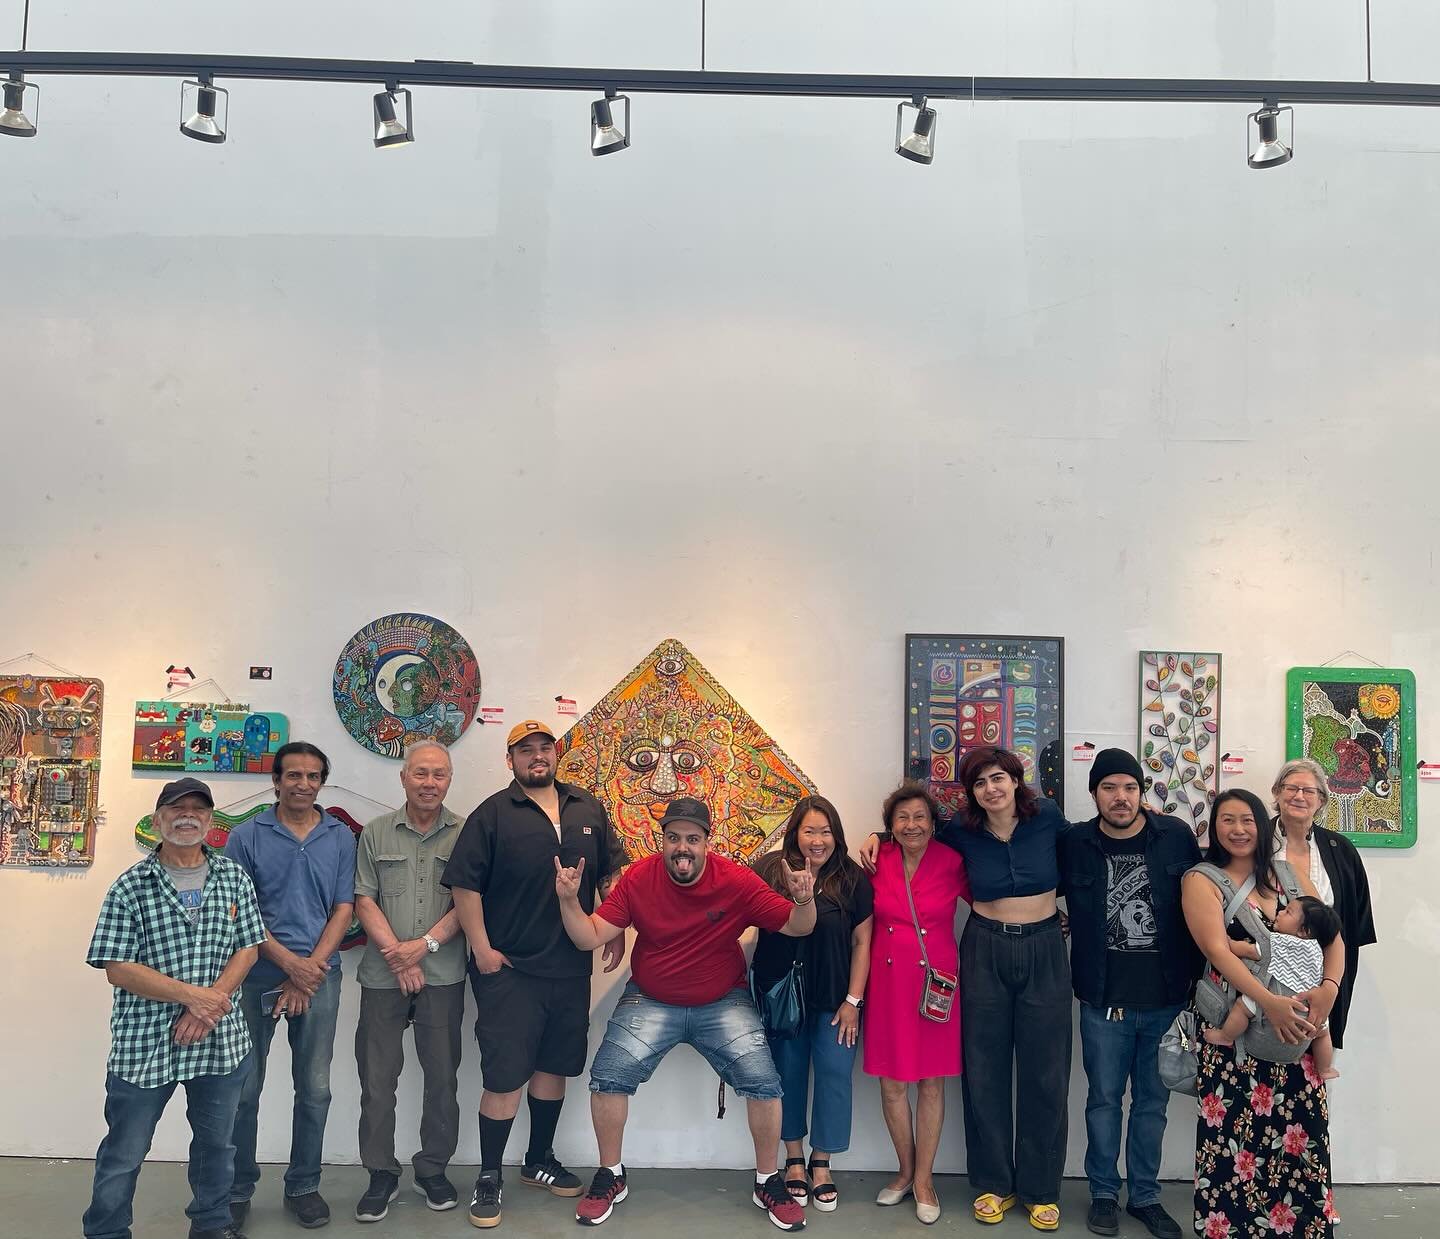 Featured artist, Magic Sean Gil, with some of the supporting artists on closing day. 

Thank you everyone for coming out to see our exhibit 
A LOVELY DAY! See you at the next FUSE Presents event!

#artcommunity #groupshow #sanjoseartists #southbayart